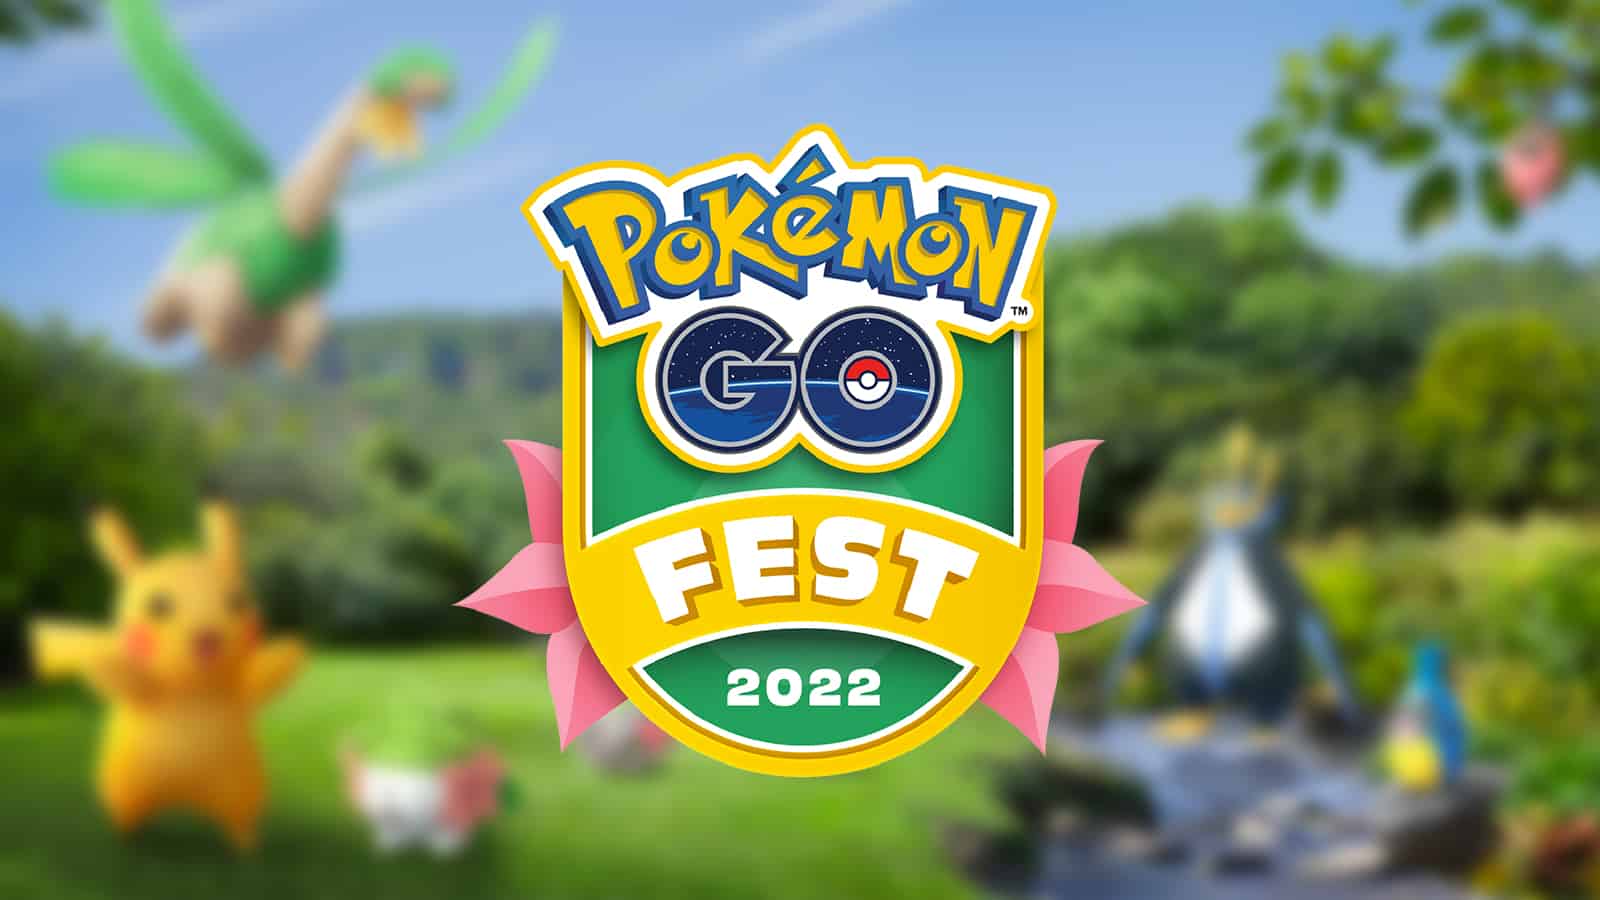 Pokemon Go Fest 2022 Day 1 free features